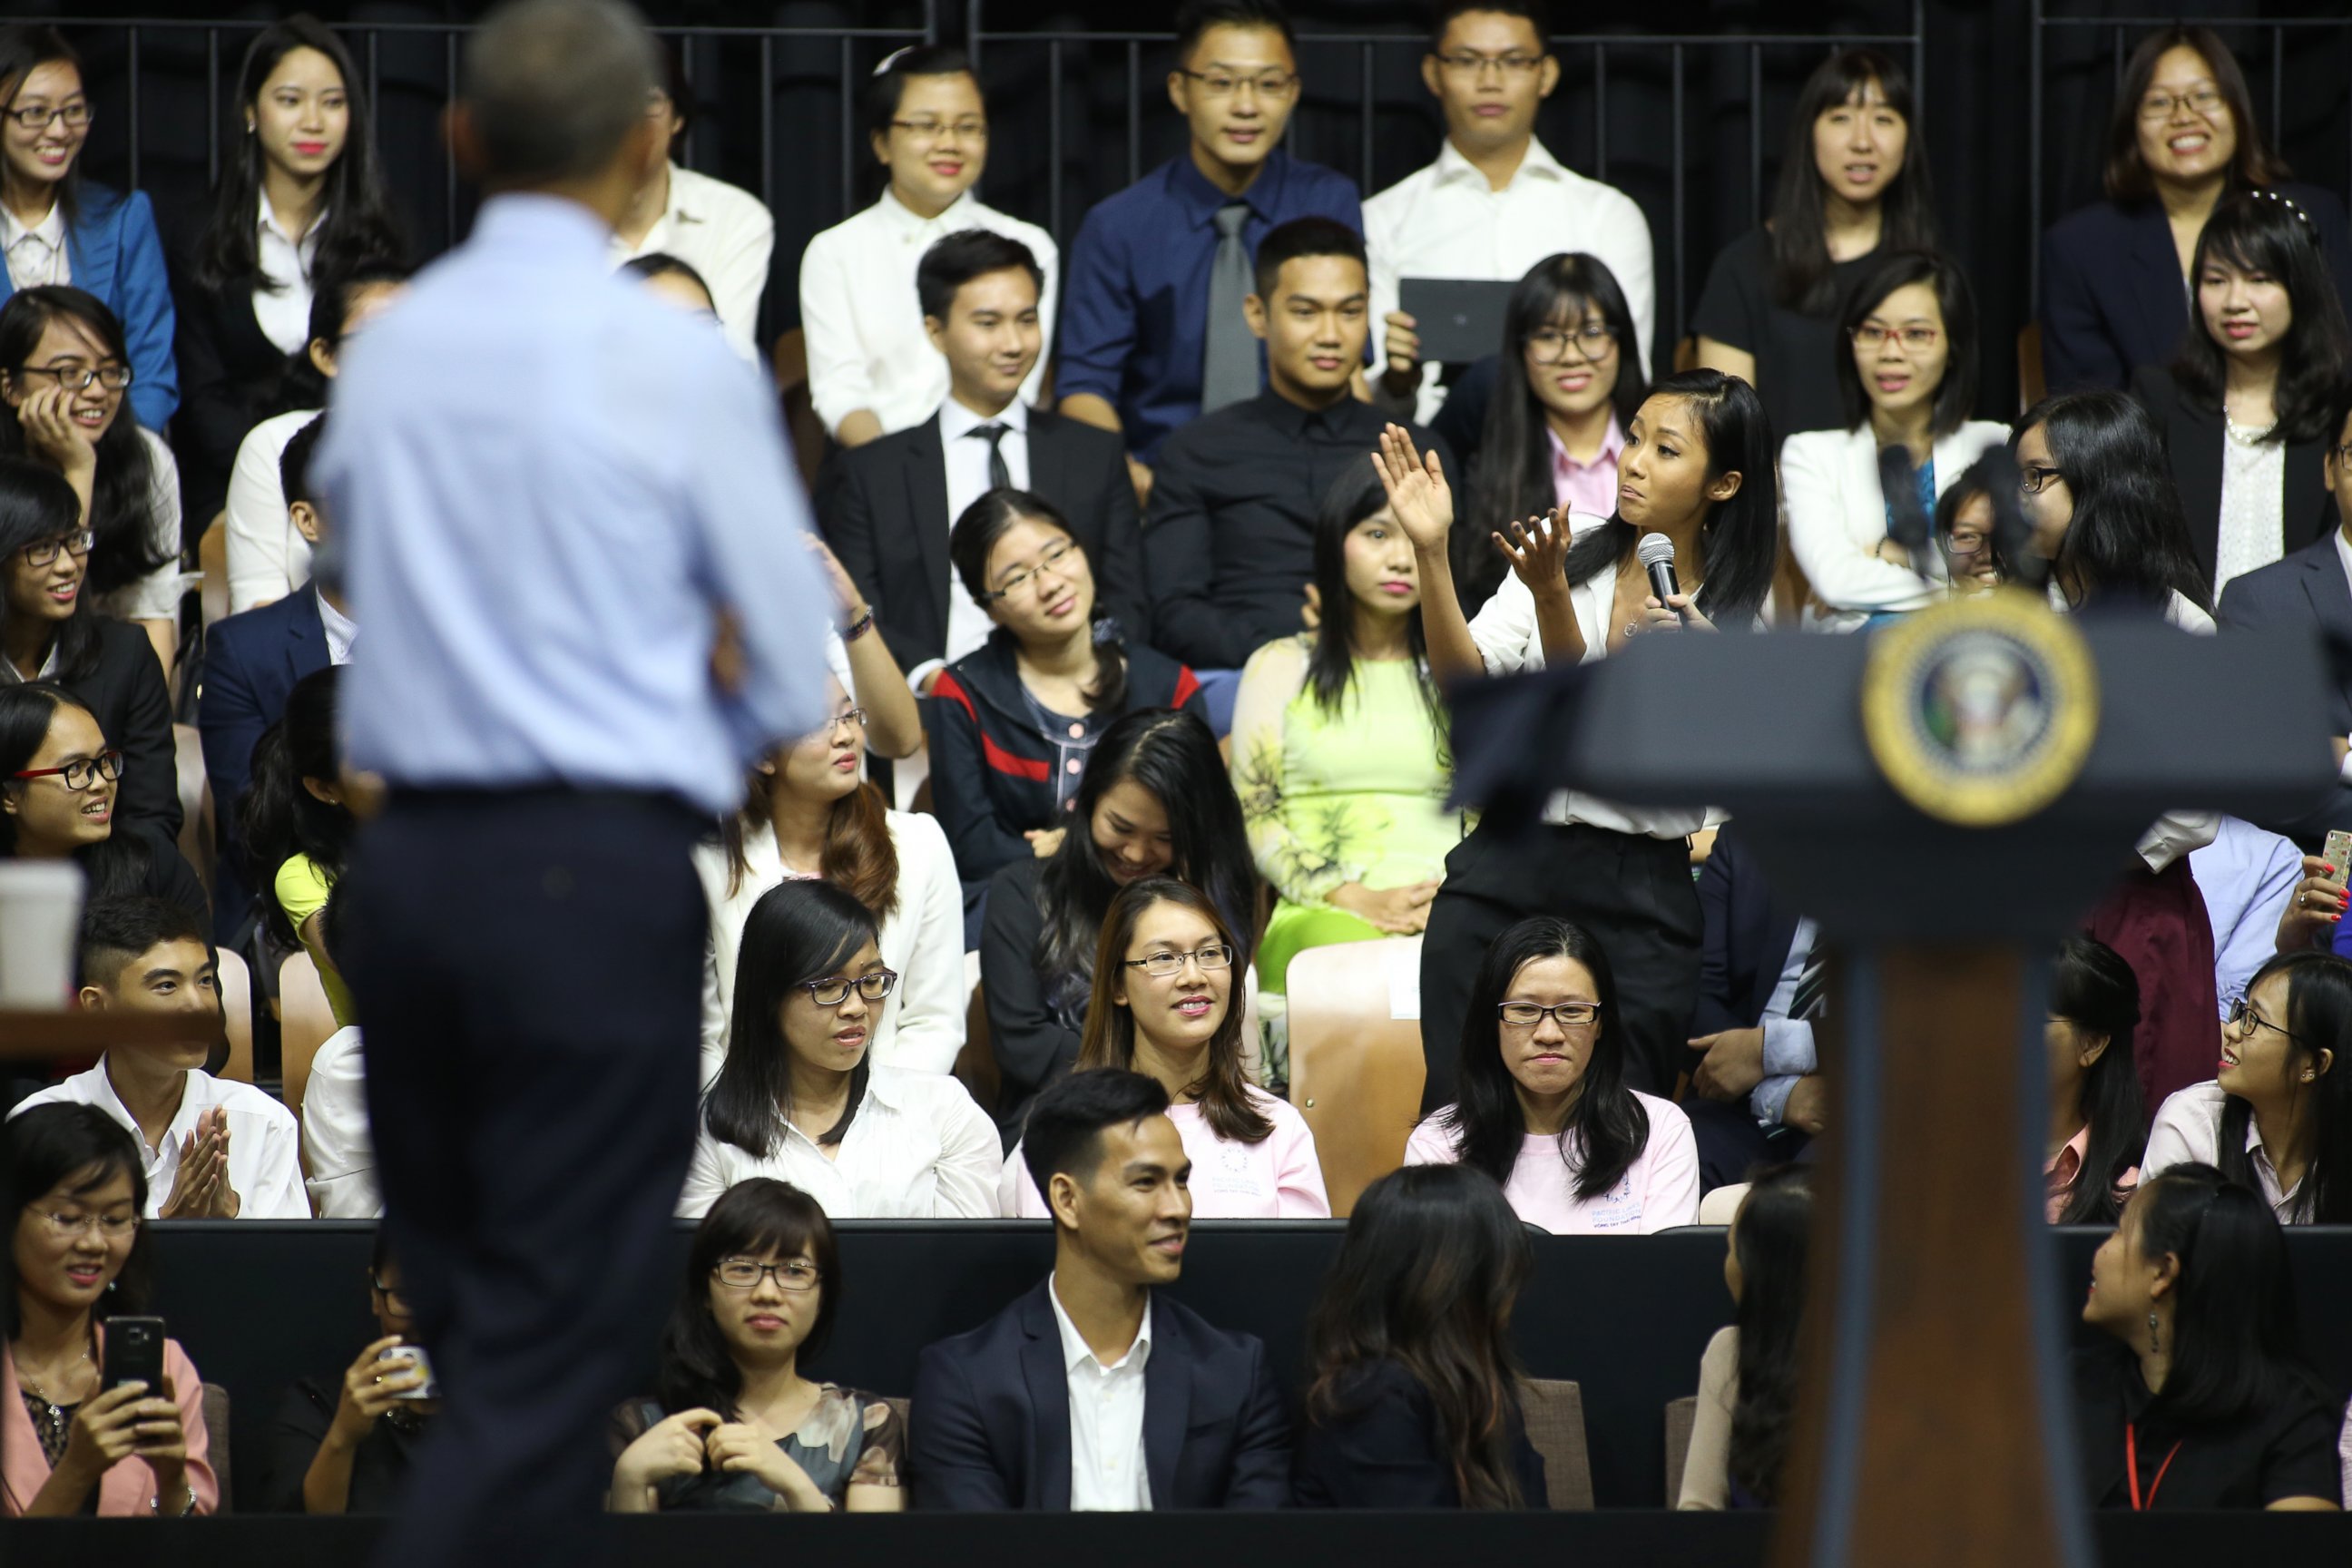 PHOTO: Vietnamese rapper Suboi, right, claps her hands and raps for U.S. President Barack Obama at a town-hall style event for the Young Southeast Asian Leaders Initiative at the GEM Center in Ho Chi Minh City, Vietnam, May 25, 2016.